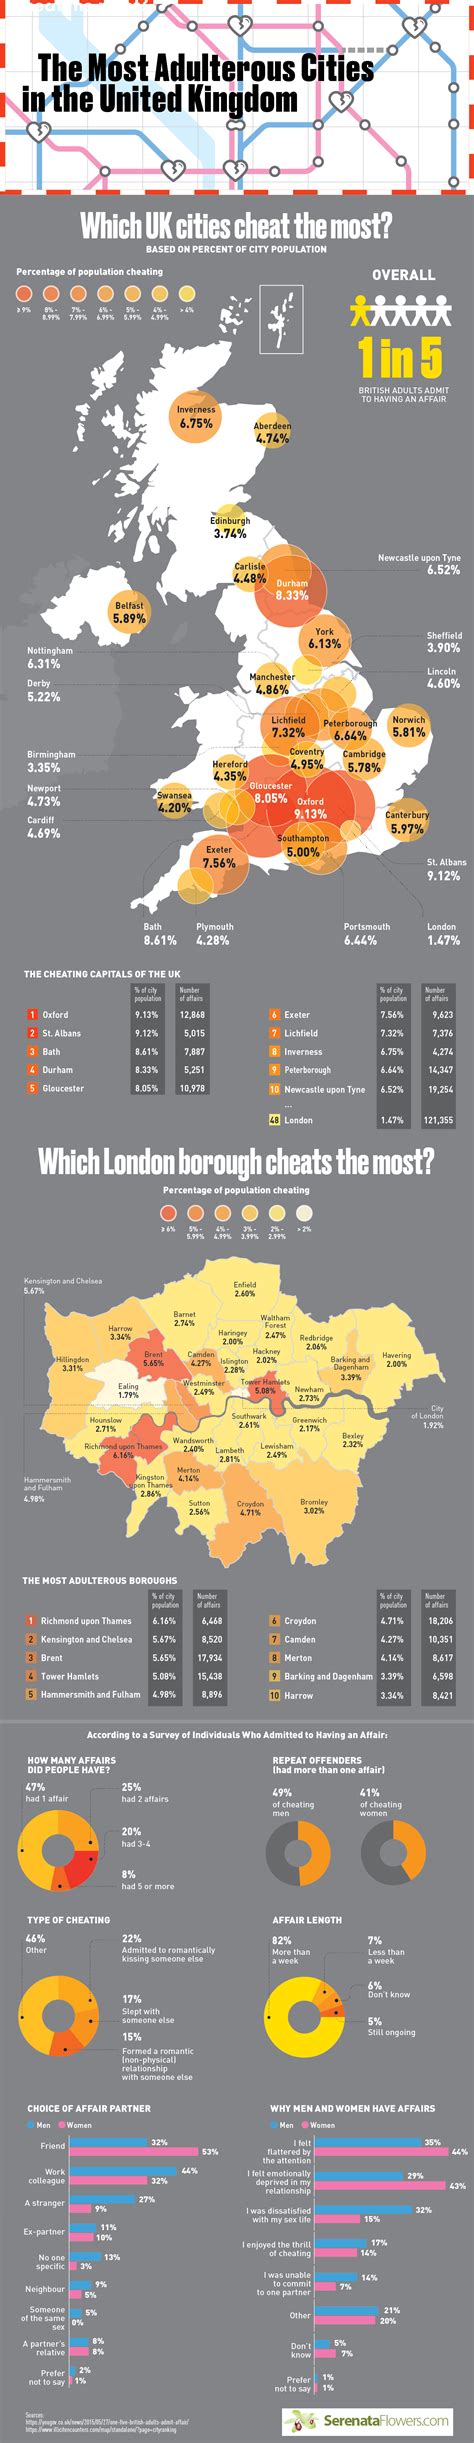 the most adulterous cities in the united kingdom united kingdom city